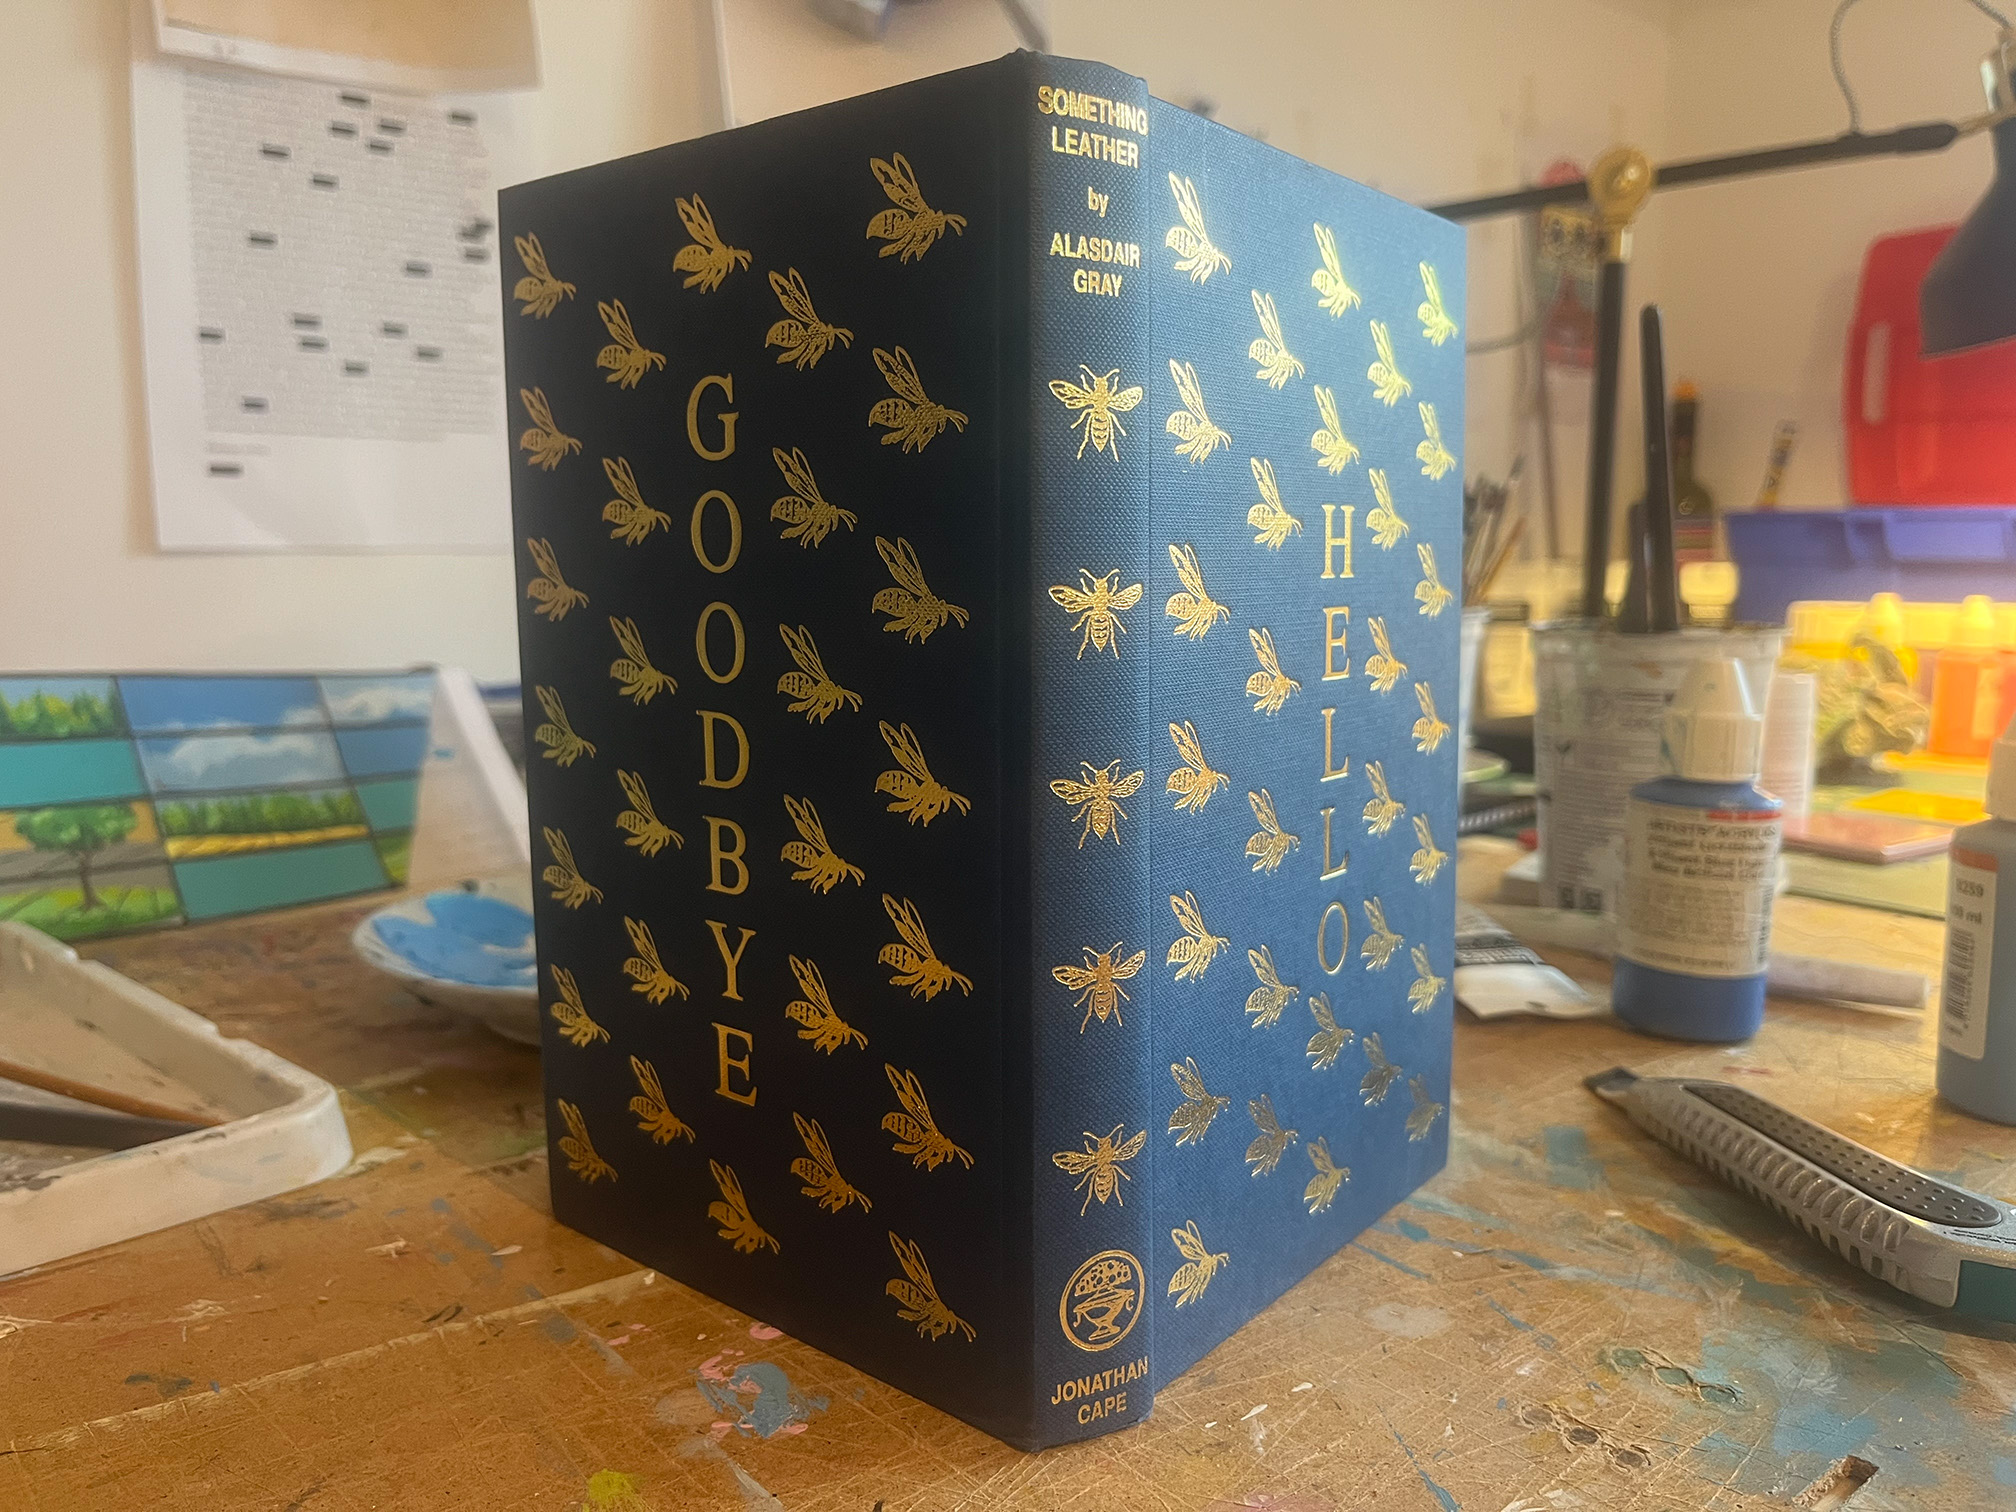 A photograph of the spine and cover of an open book standing upright on a brown desk. The blue book is covered in gold illustrations of bees, with the words GOODBYE and HELLO in gold type vertically on the back and front covers respectively. Behind the book there are paint tubes and paint brushes.